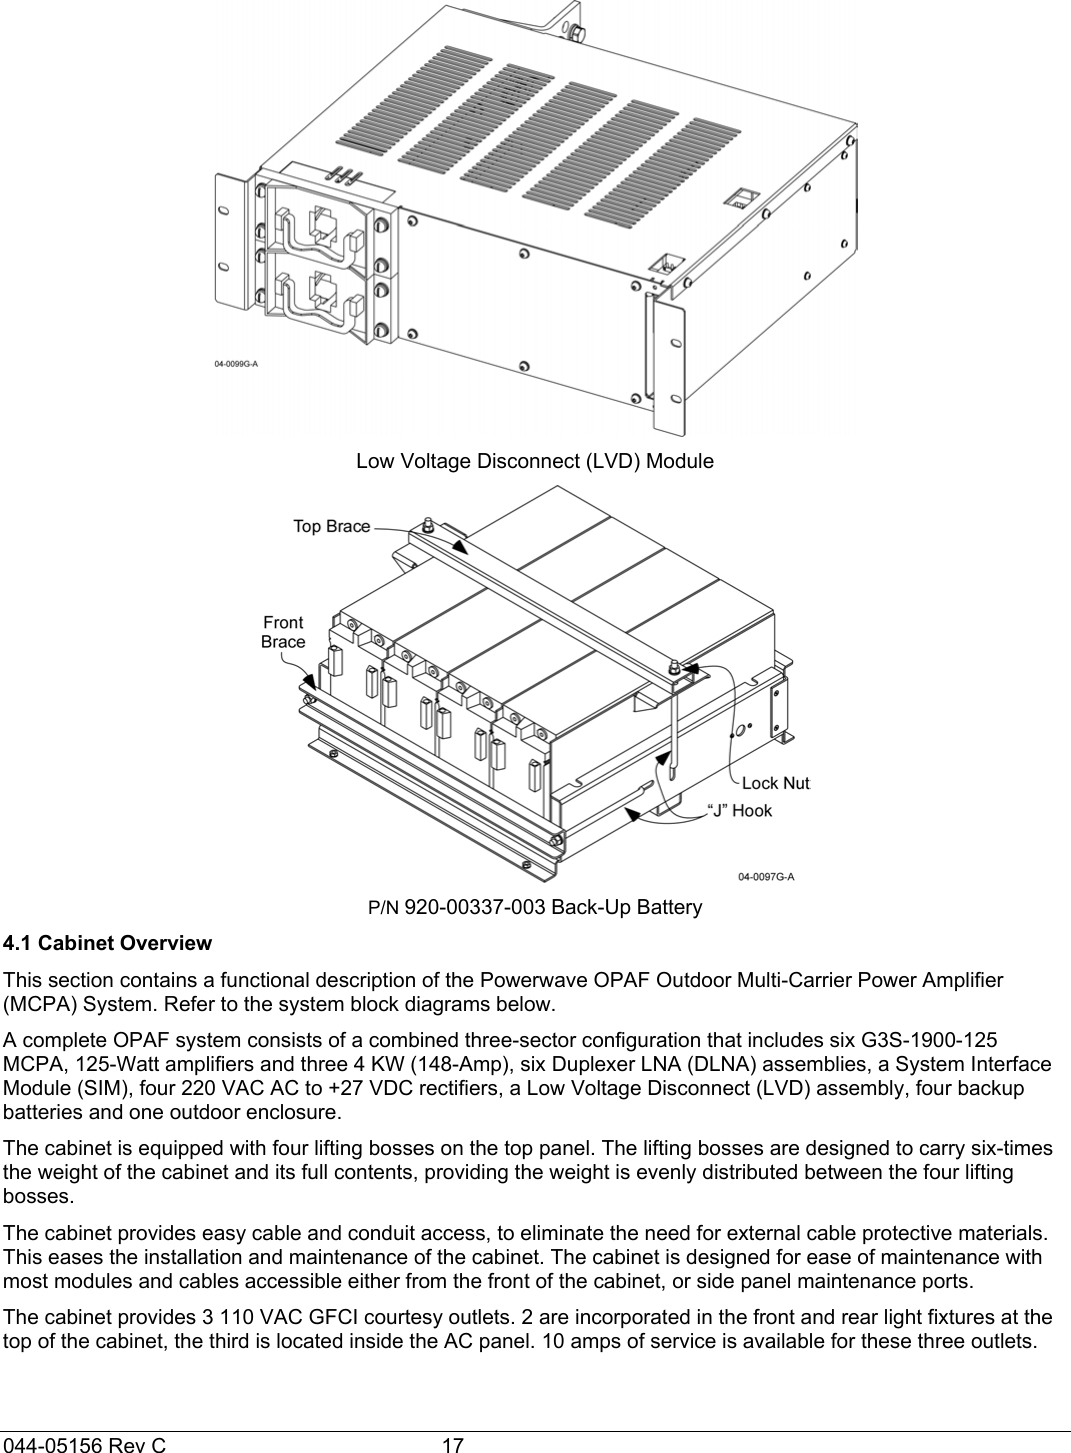 044-05156 Rev C  17  Low Voltage Disconnect (LVD) Module  P/N 920-00337-003 Back-Up Battery 4.1 Cabinet Overview This section contains a functional description of the Powerwave OPAF Outdoor Multi-Carrier Power Amplifier (MCPA) System. Refer to the system block diagrams below. A complete OPAF system consists of a combined three-sector configuration that includes six G3S-1900-125 MCPA, 125-Watt amplifiers and three 4 KW (148-Amp), six Duplexer LNA (DLNA) assemblies, a System Interface Module (SIM), four 220 VAC AC to +27 VDC rectifiers, a Low Voltage Disconnect (LVD) assembly, four backup batteries and one outdoor enclosure. The cabinet is equipped with four lifting bosses on the top panel. The lifting bosses are designed to carry six-times the weight of the cabinet and its full contents, providing the weight is evenly distributed between the four lifting bosses.  The cabinet provides easy cable and conduit access, to eliminate the need for external cable protective materials. This eases the installation and maintenance of the cabinet. The cabinet is designed for ease of maintenance with most modules and cables accessible either from the front of the cabinet, or side panel maintenance ports. The cabinet provides 3 110 VAC GFCI courtesy outlets. 2 are incorporated in the front and rear light fixtures at the top of the cabinet, the third is located inside the AC panel. 10 amps of service is available for these three outlets.  